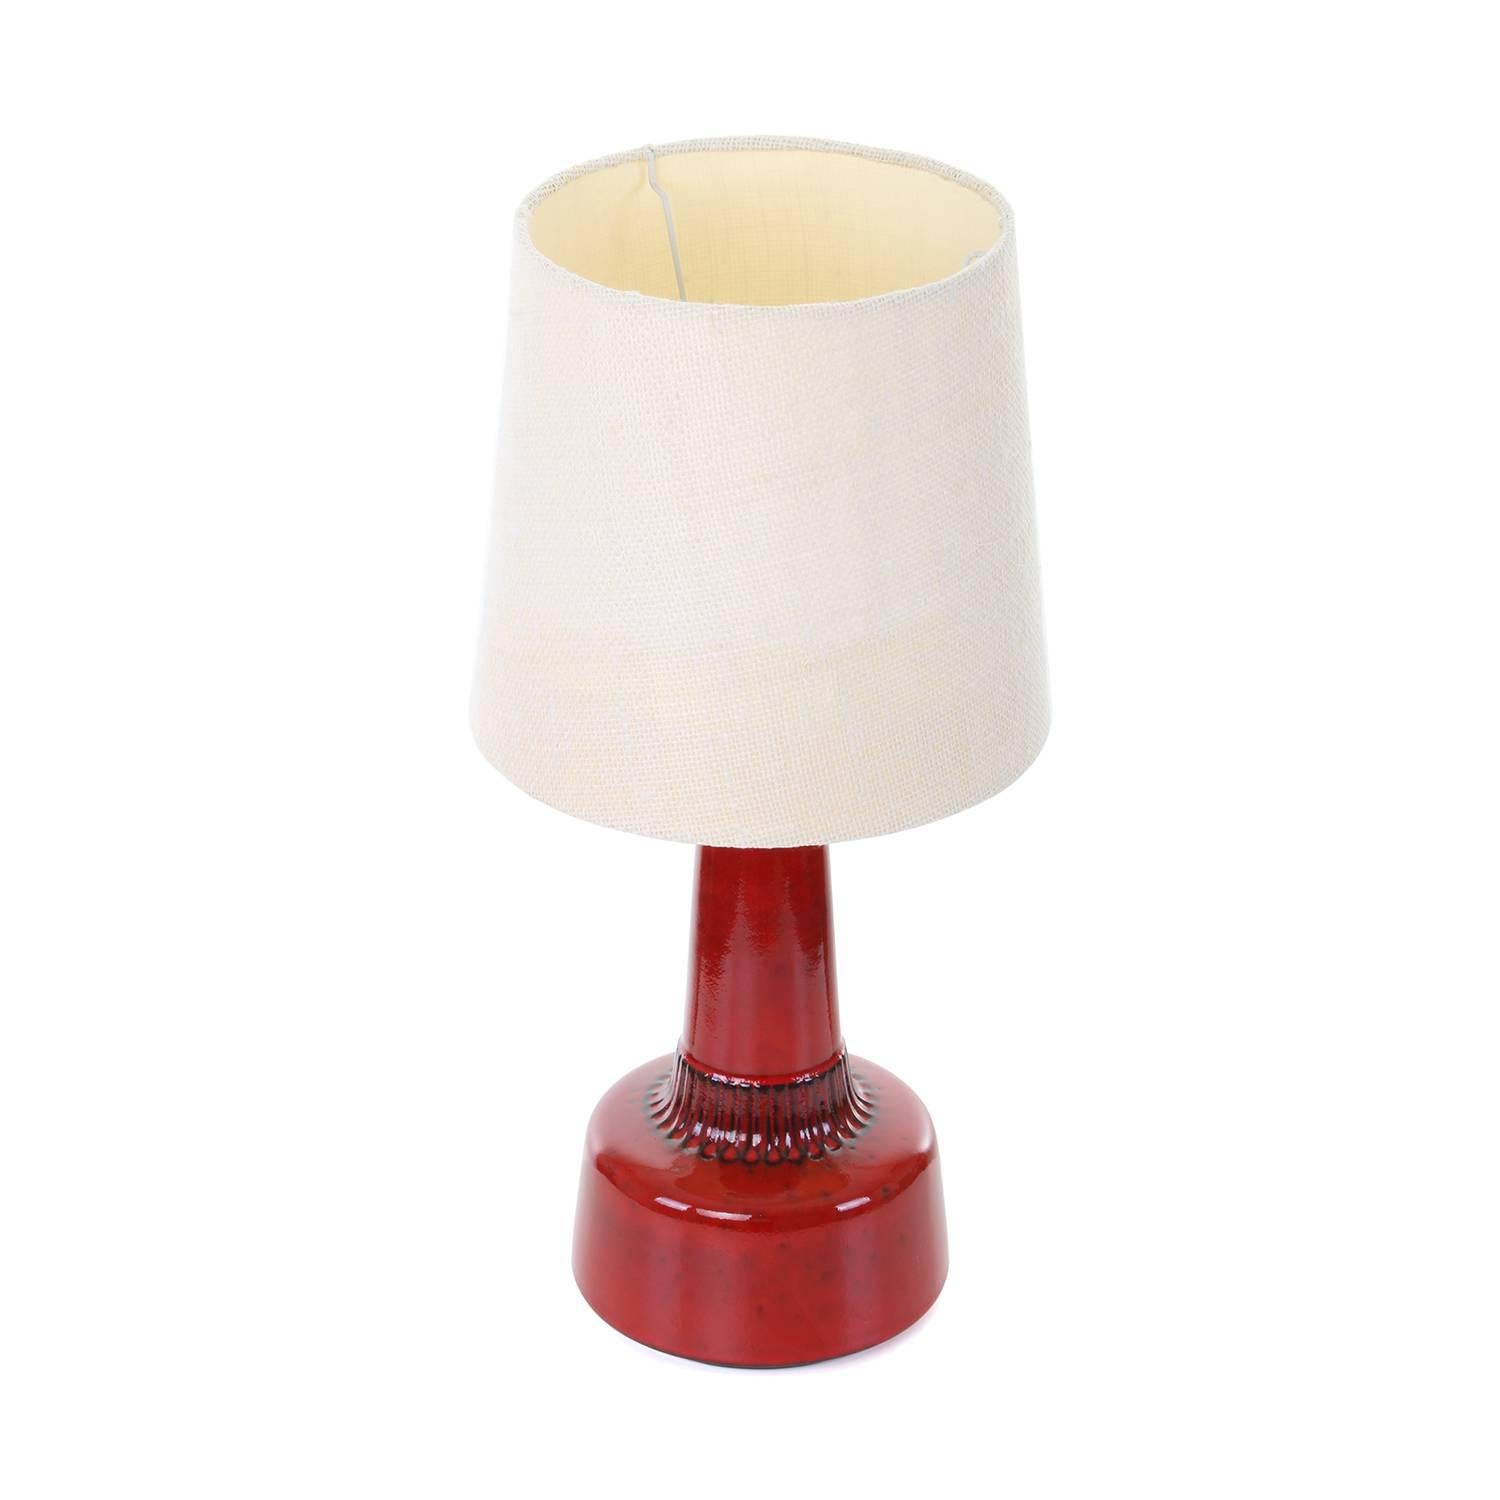 Red Table Lamp by Einar Johansen, Soholm, 1960s, Danish Modern Table Light In Excellent Condition For Sale In Frederiksberg, DK